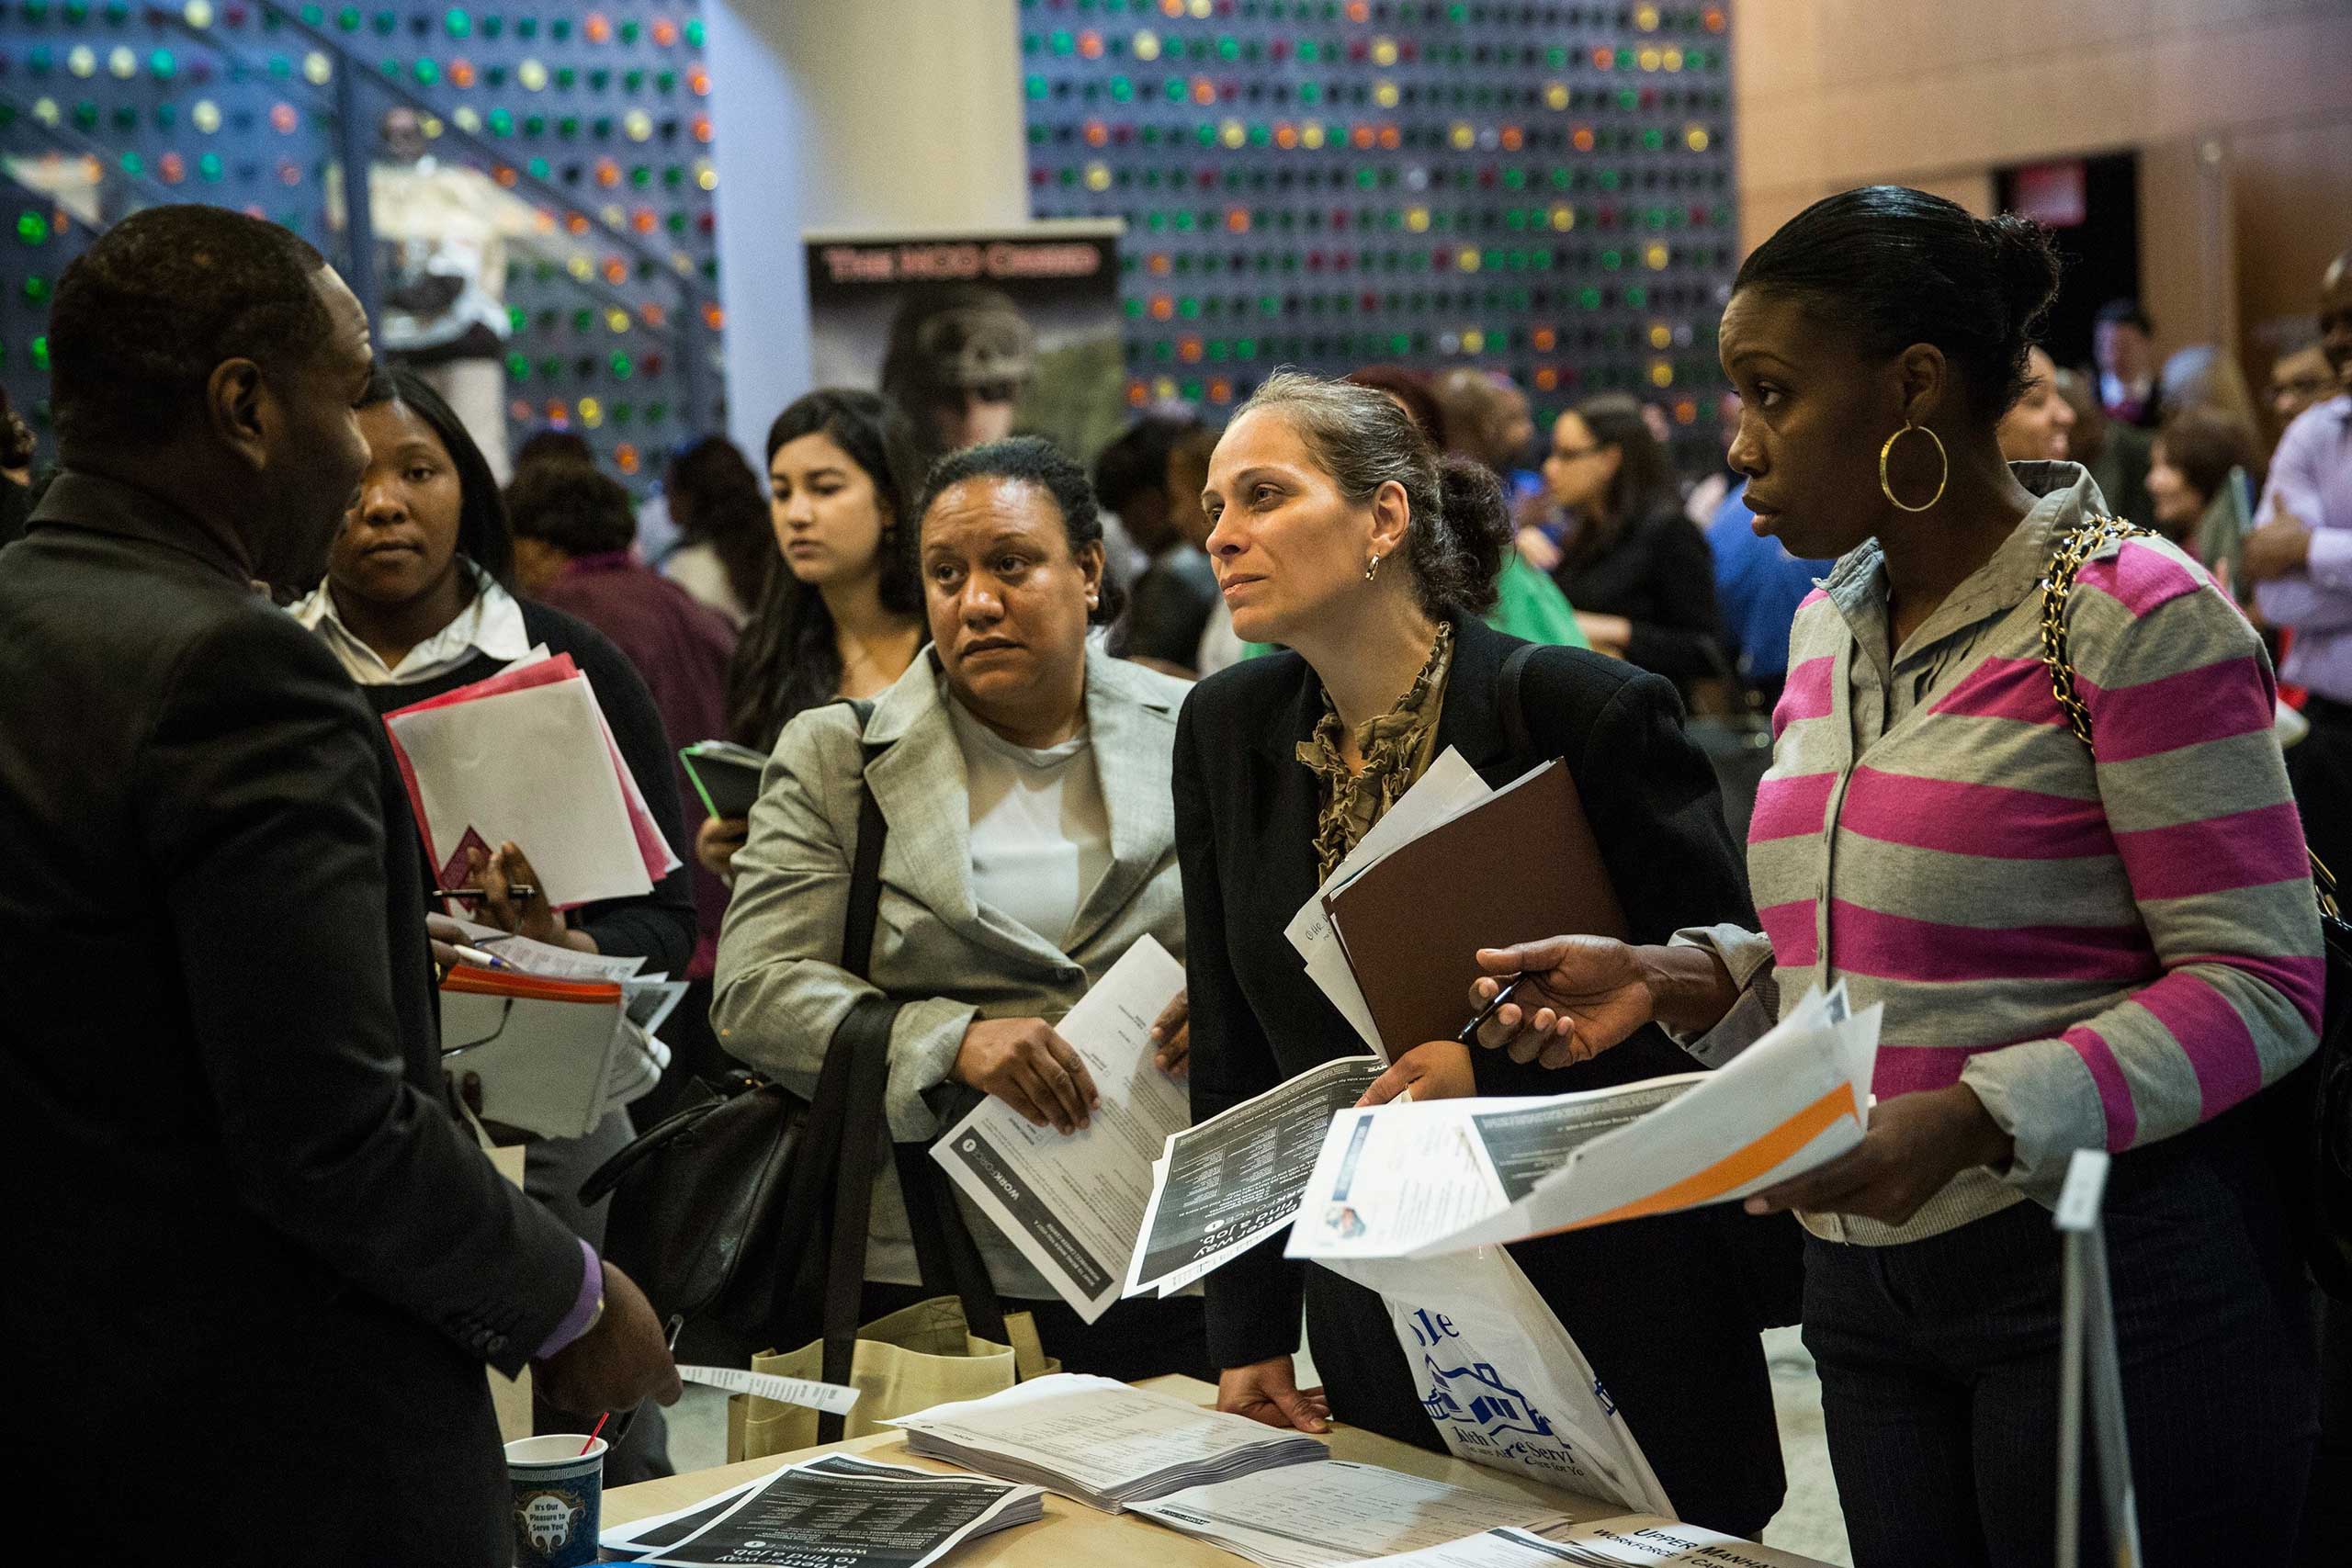 People attend a jobs fair at the Bronx Public Library on Sept. 17, 2014 in the Bronx Borough of New York City. (Andrew Burton—Getty Images)